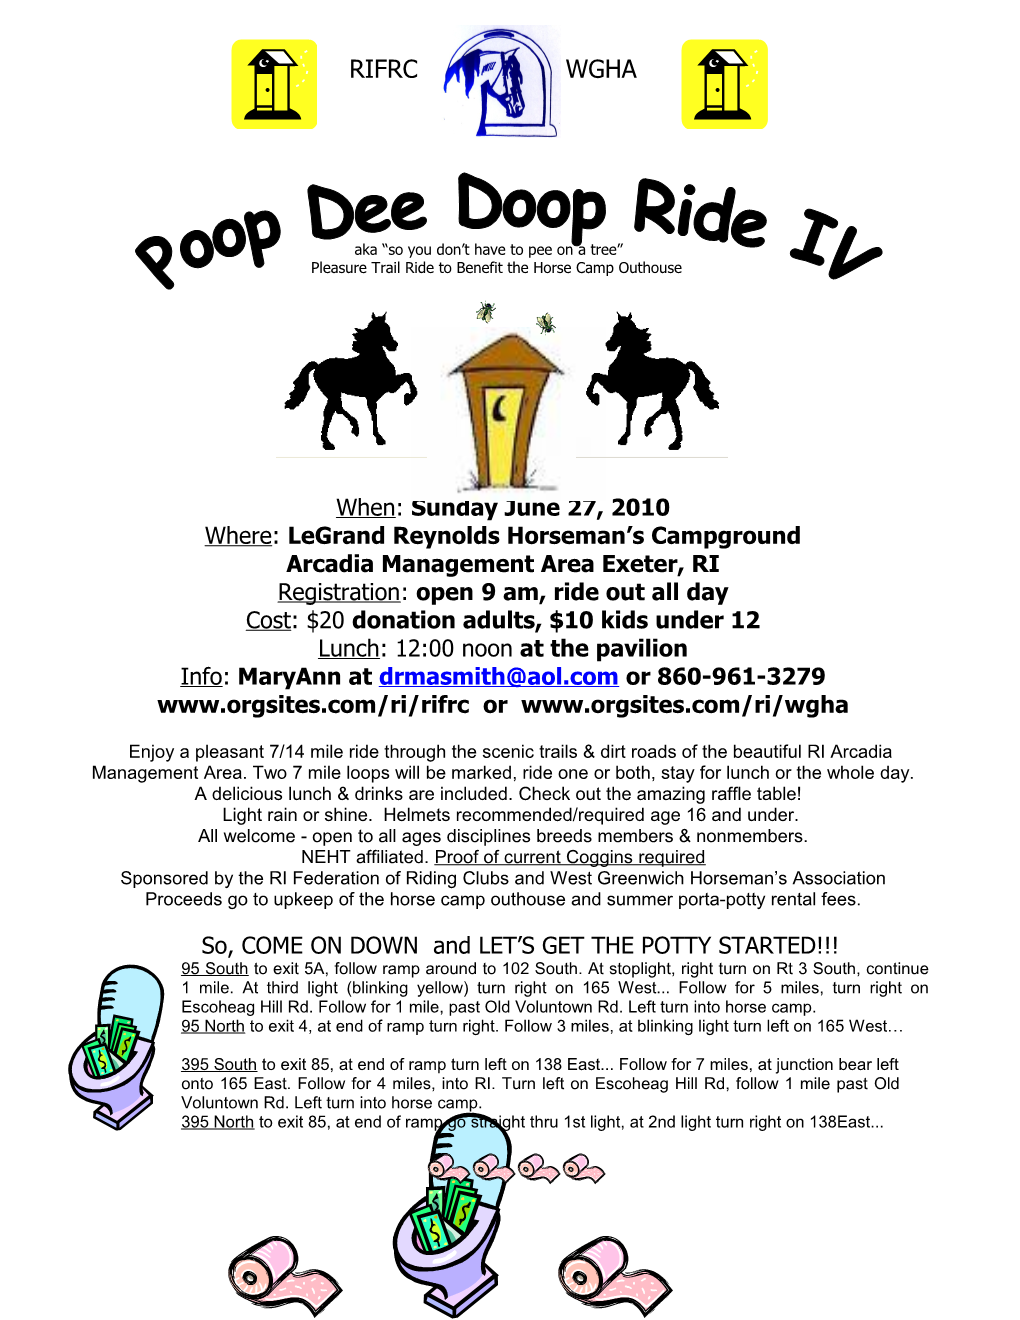 Pleasure Trail Ride to Benefit the Horse Camp Outhouse